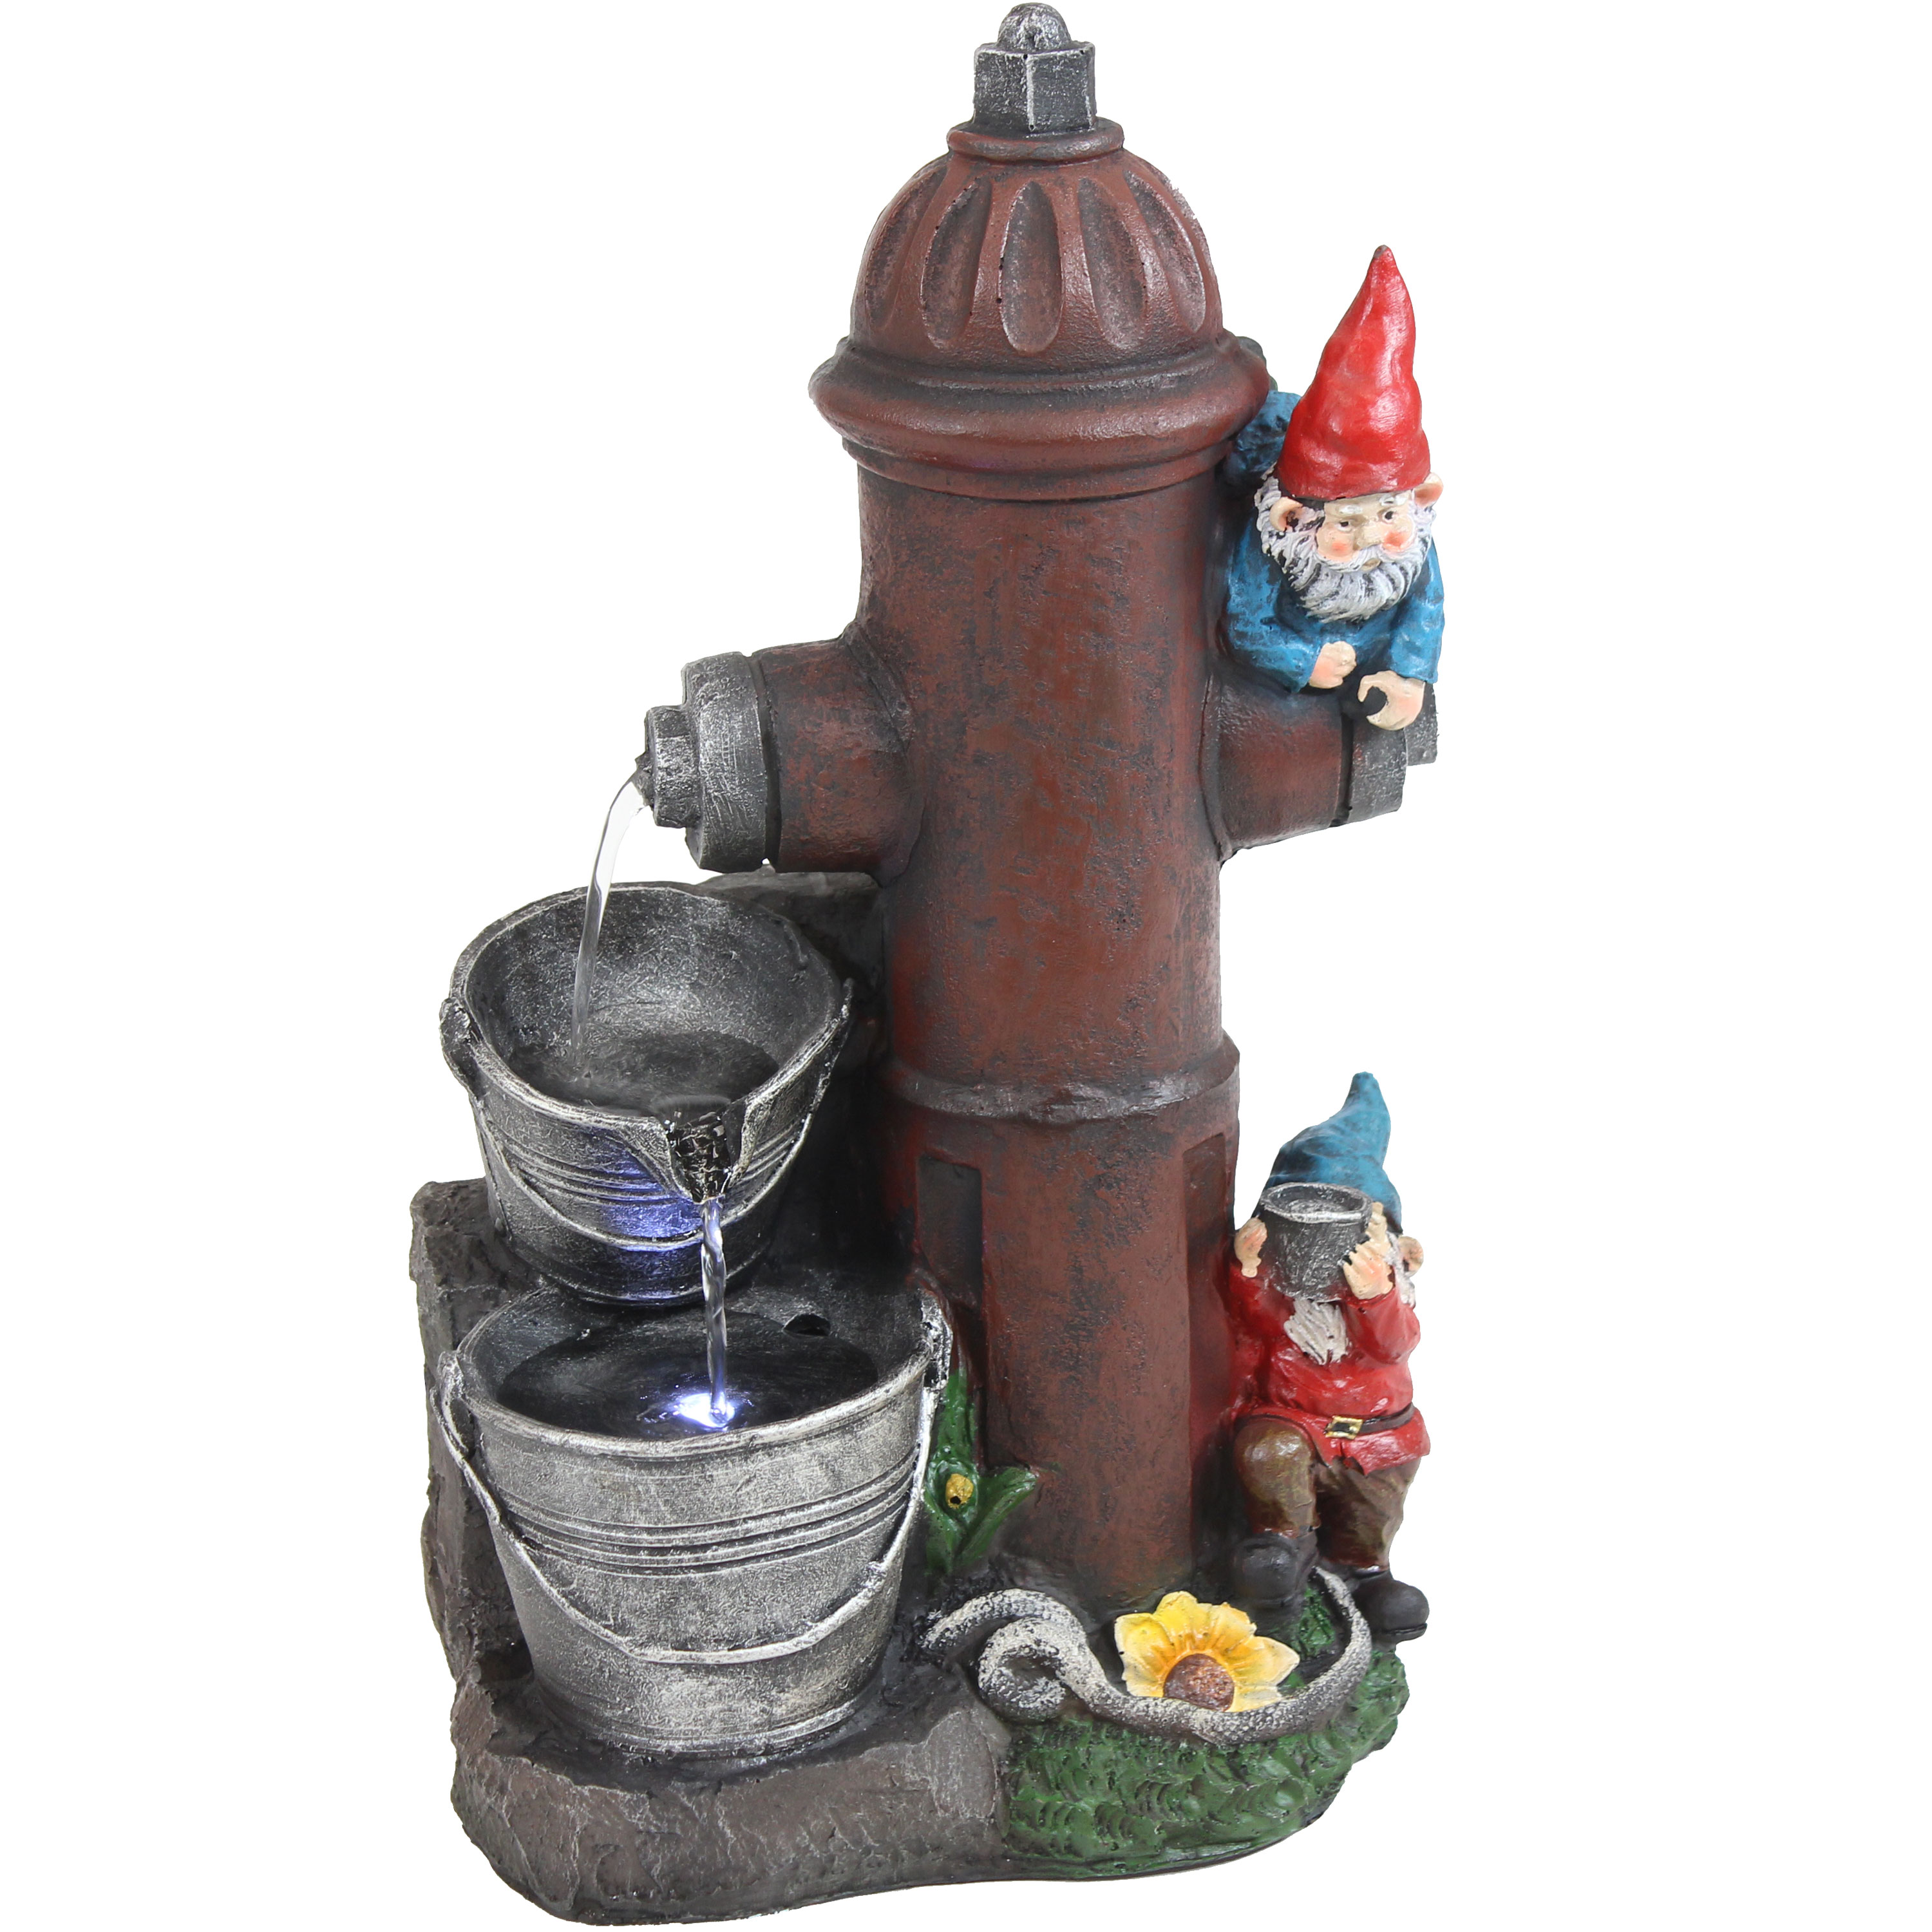 Sunnydaze Fire Hydrant Gnomes Outdoor Water Fountain with LED Light - 16-Inch